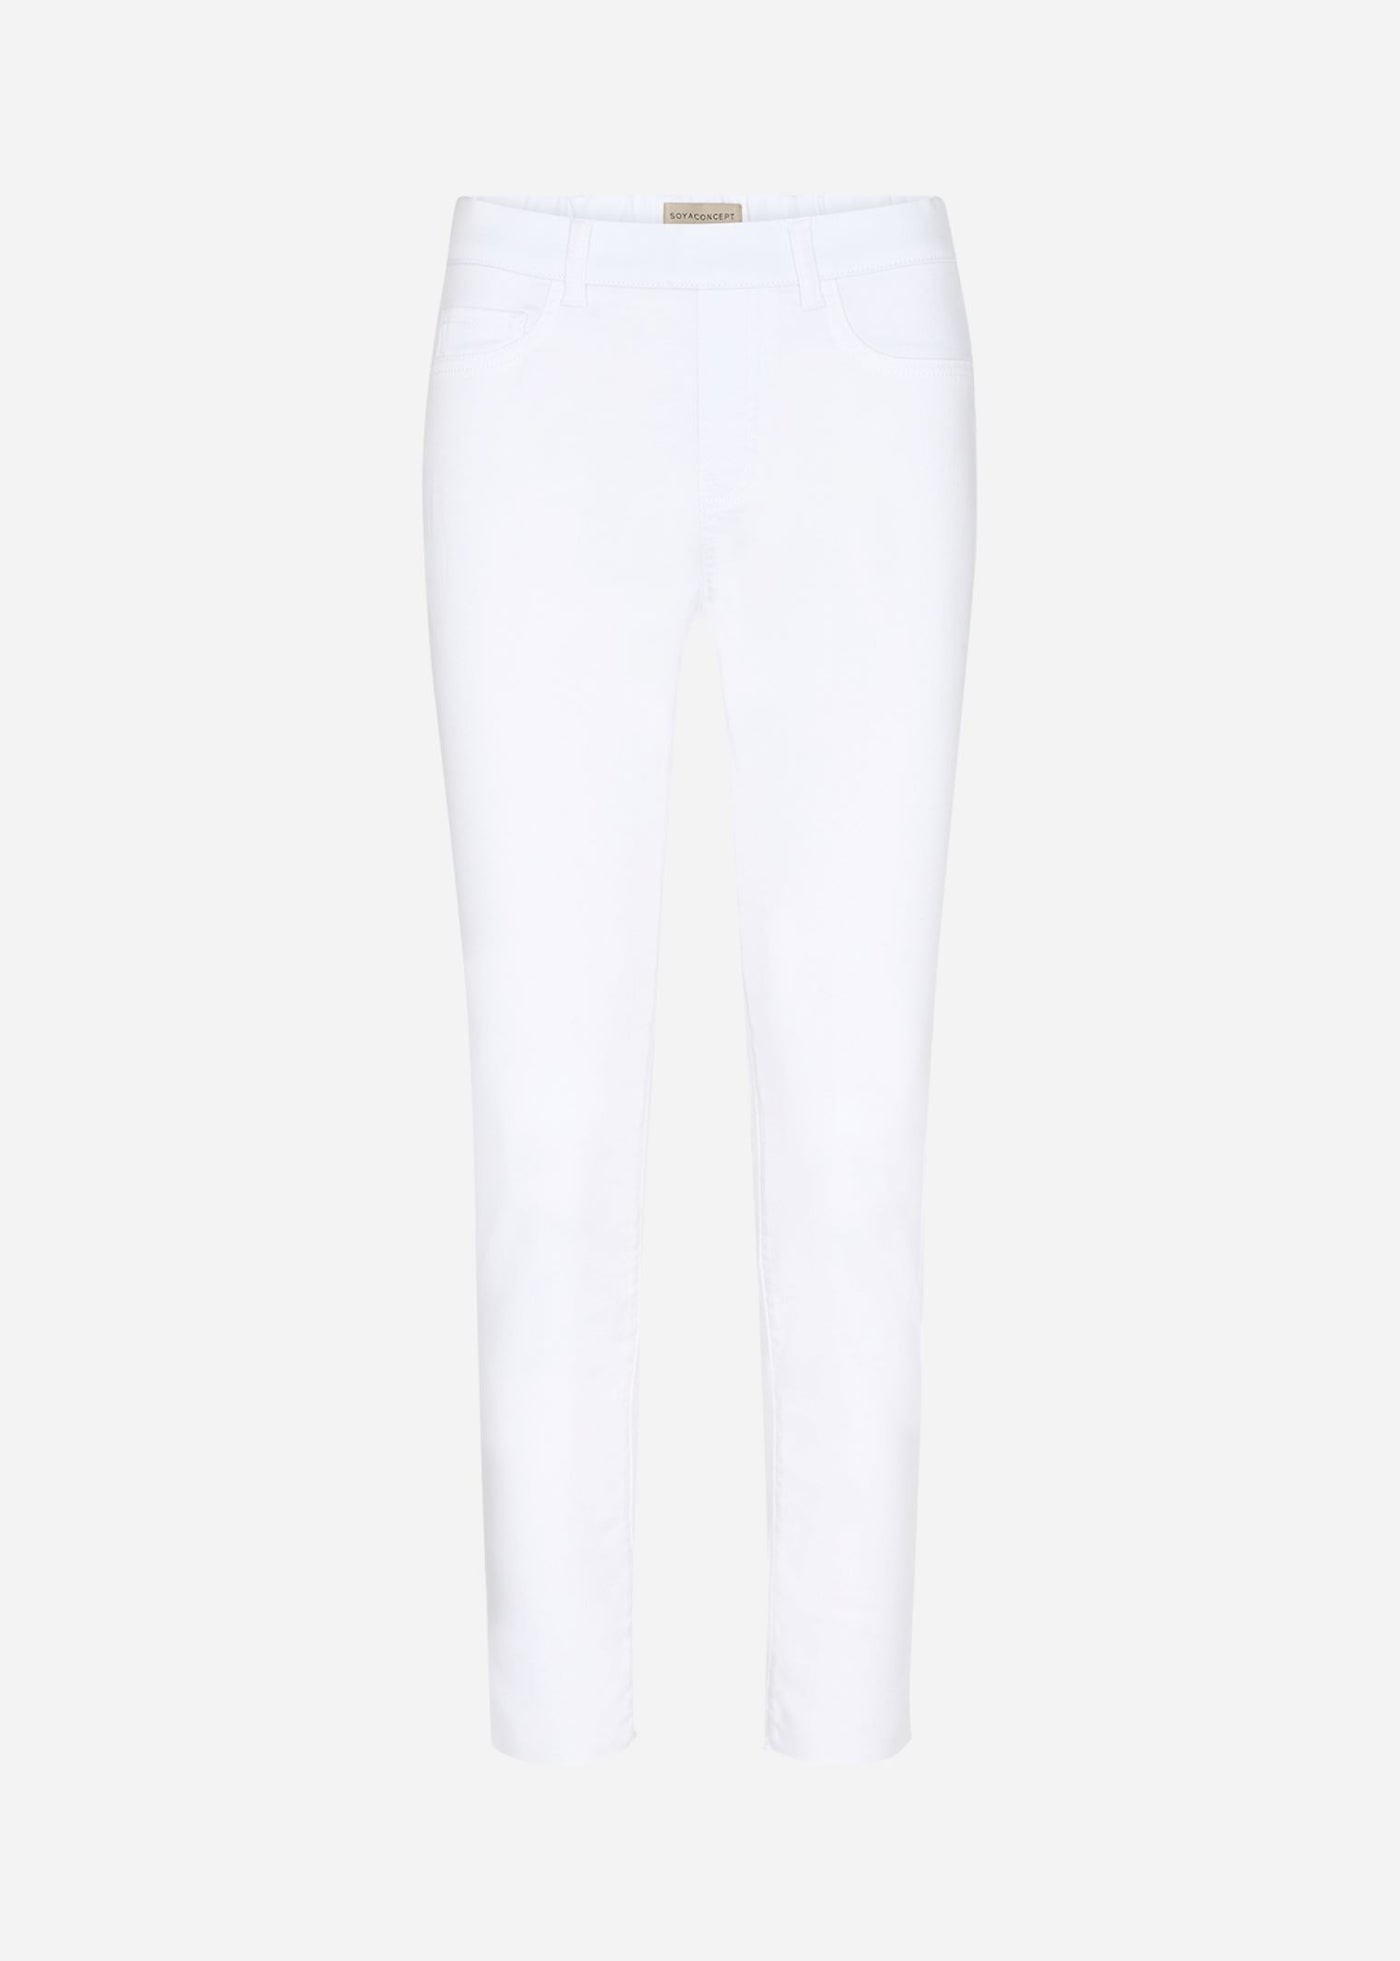 Soya Concept 17177 White Ankle Length Pull On Jeans